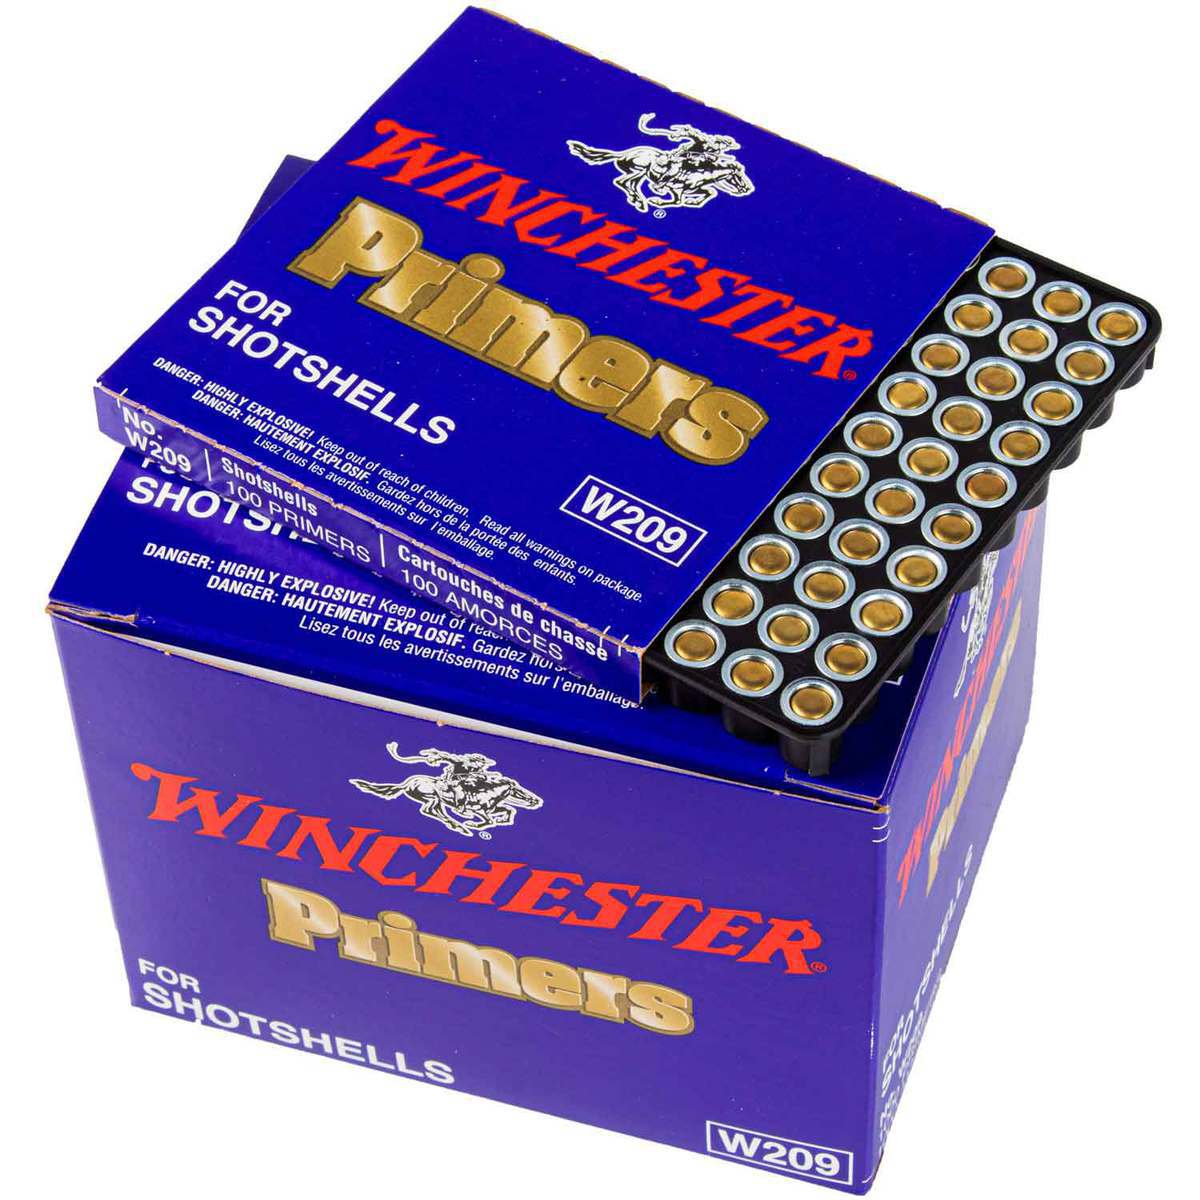 Winchester Primers #209 Shotshell Box of 1000 (10 Trays of 100) - Firearms World Online Store